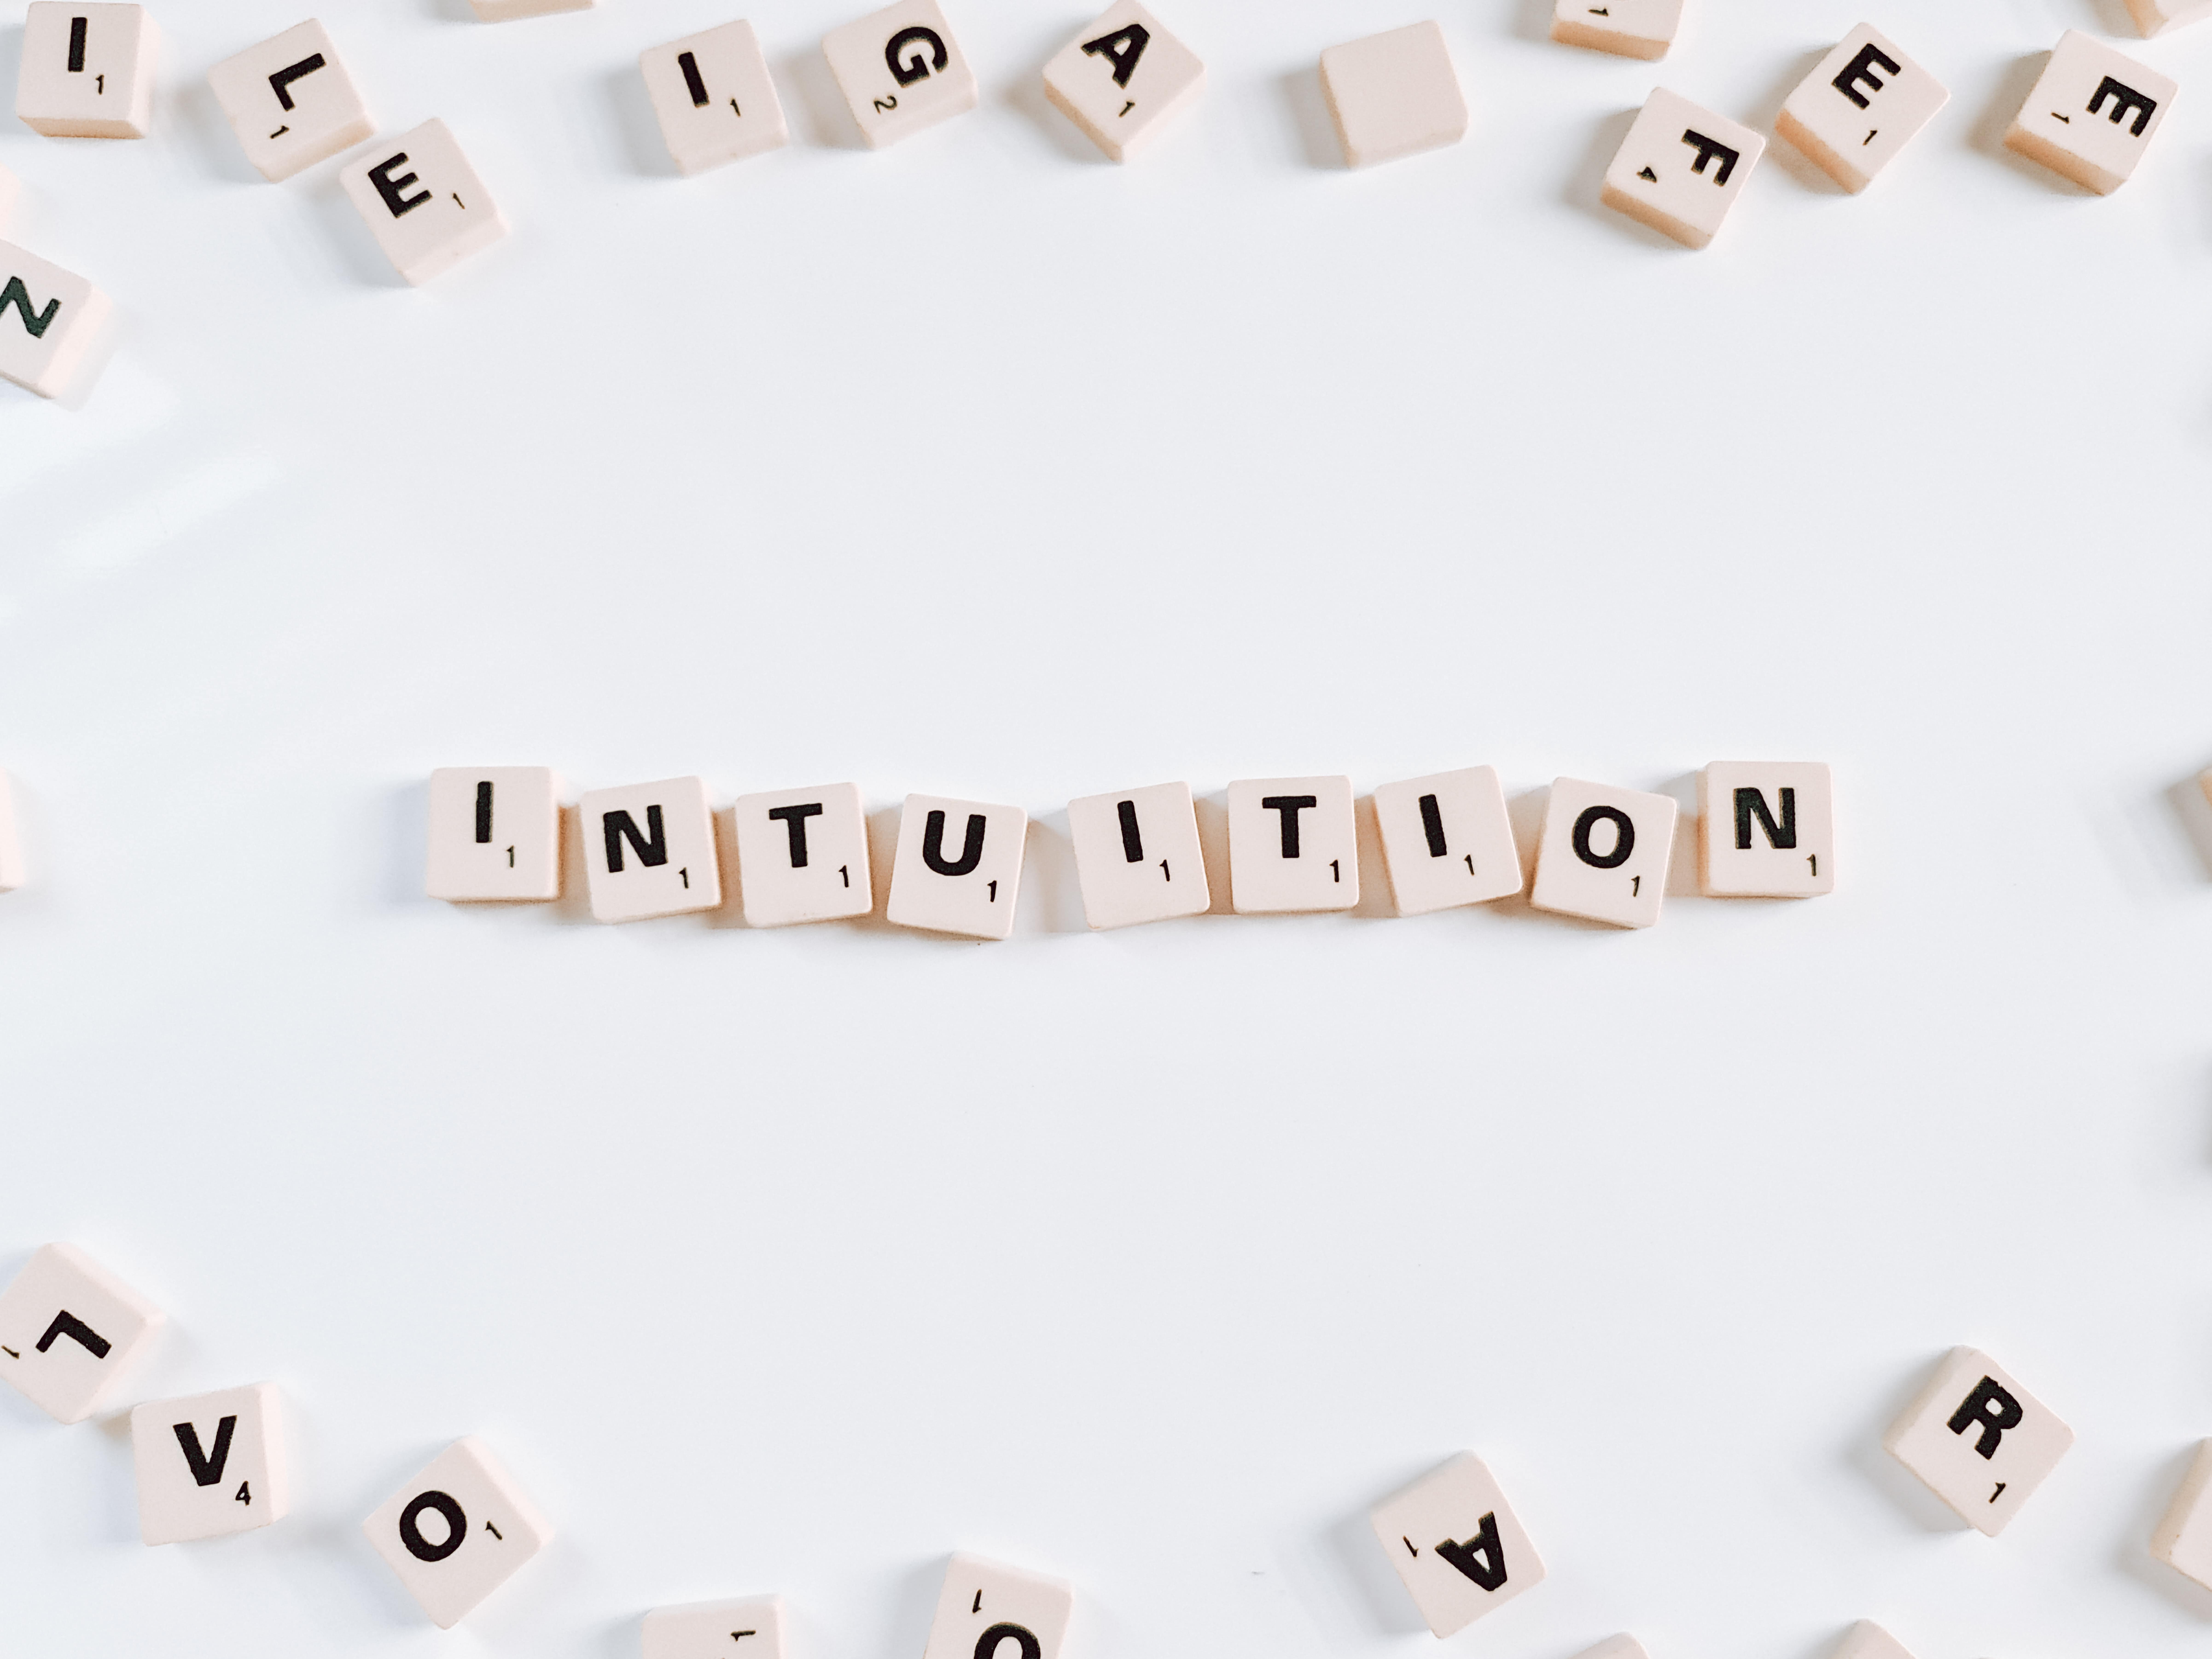 scrabble pieces spelling "intuition"